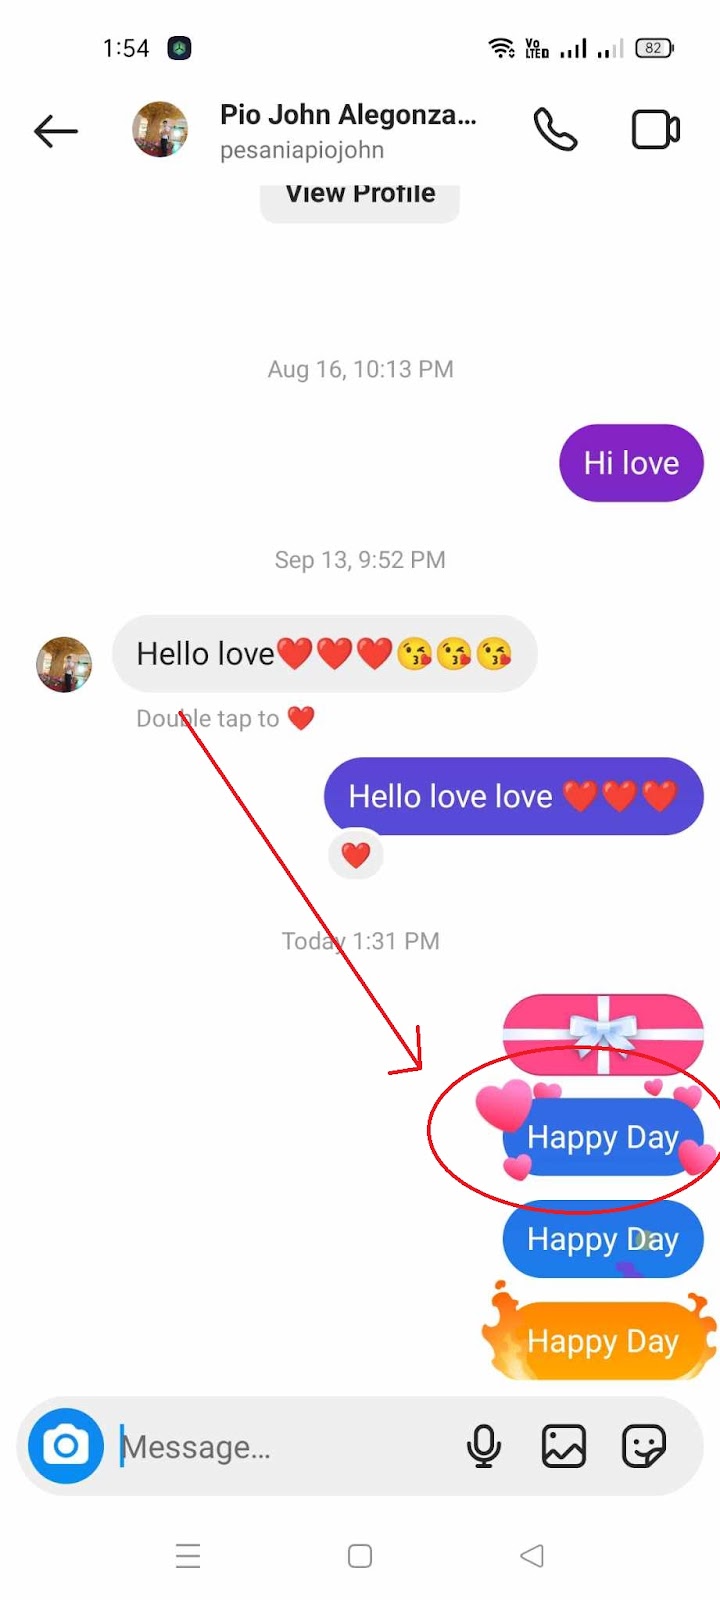 How to Send GIft Messages on Instagram - Flying Hearts Effect